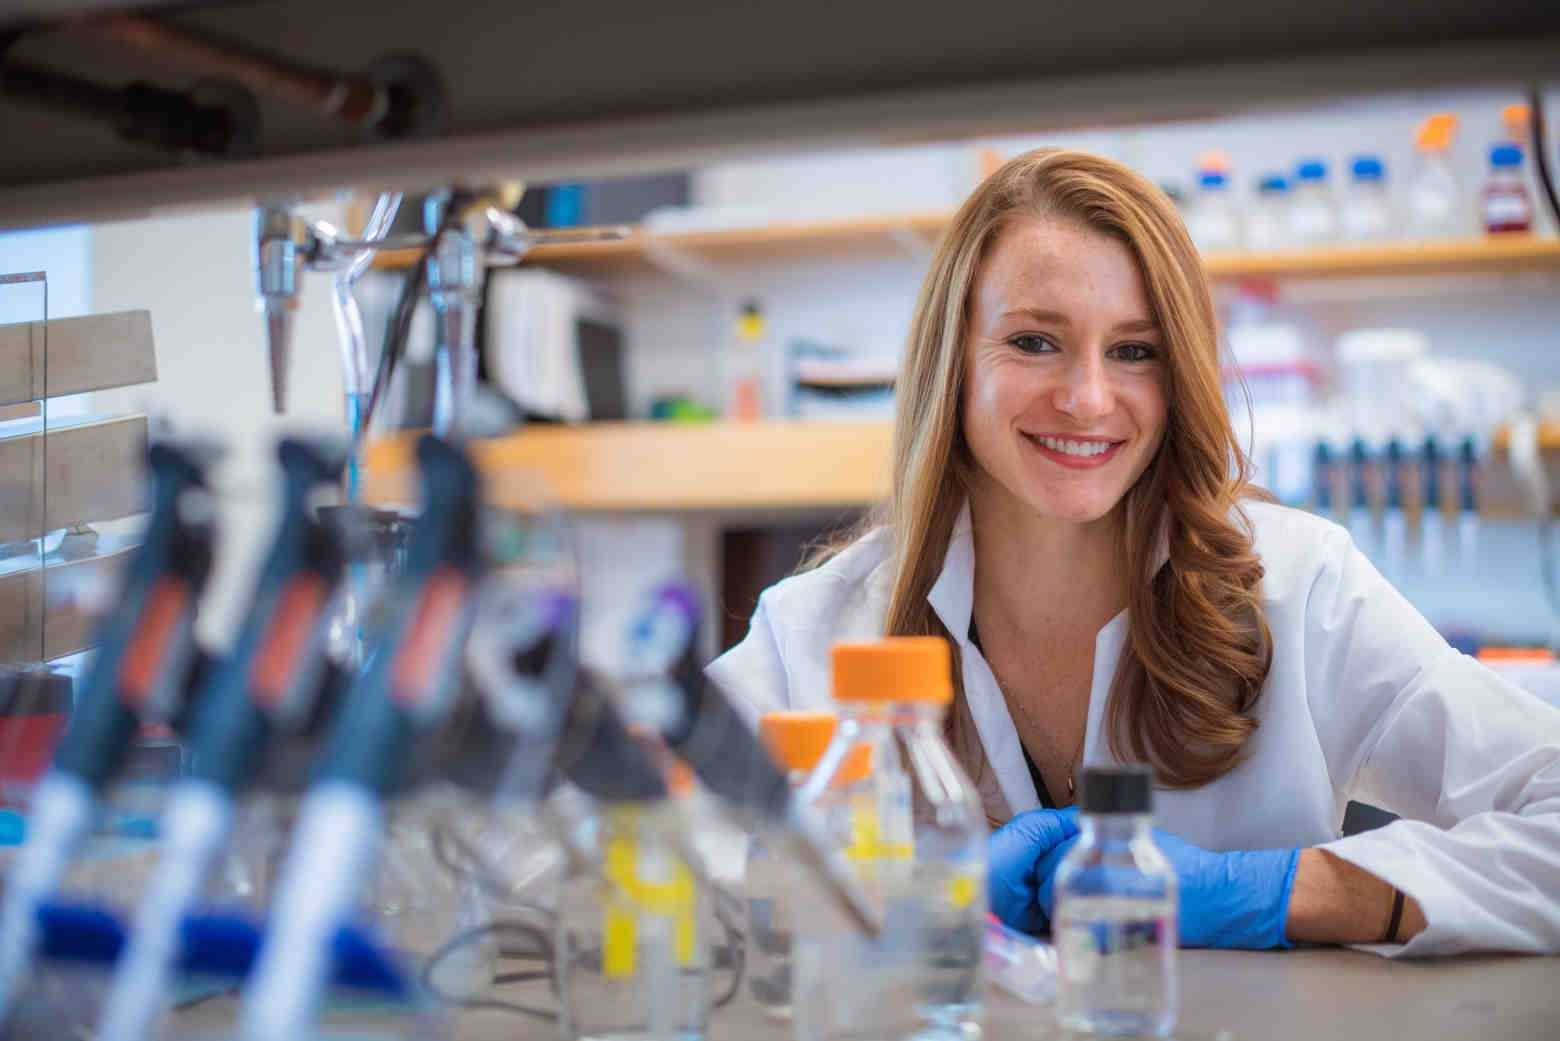 After graduating from the Harvard/MIT MD-PhD program, Kristin Knouse aspired to have a research lab of her own.